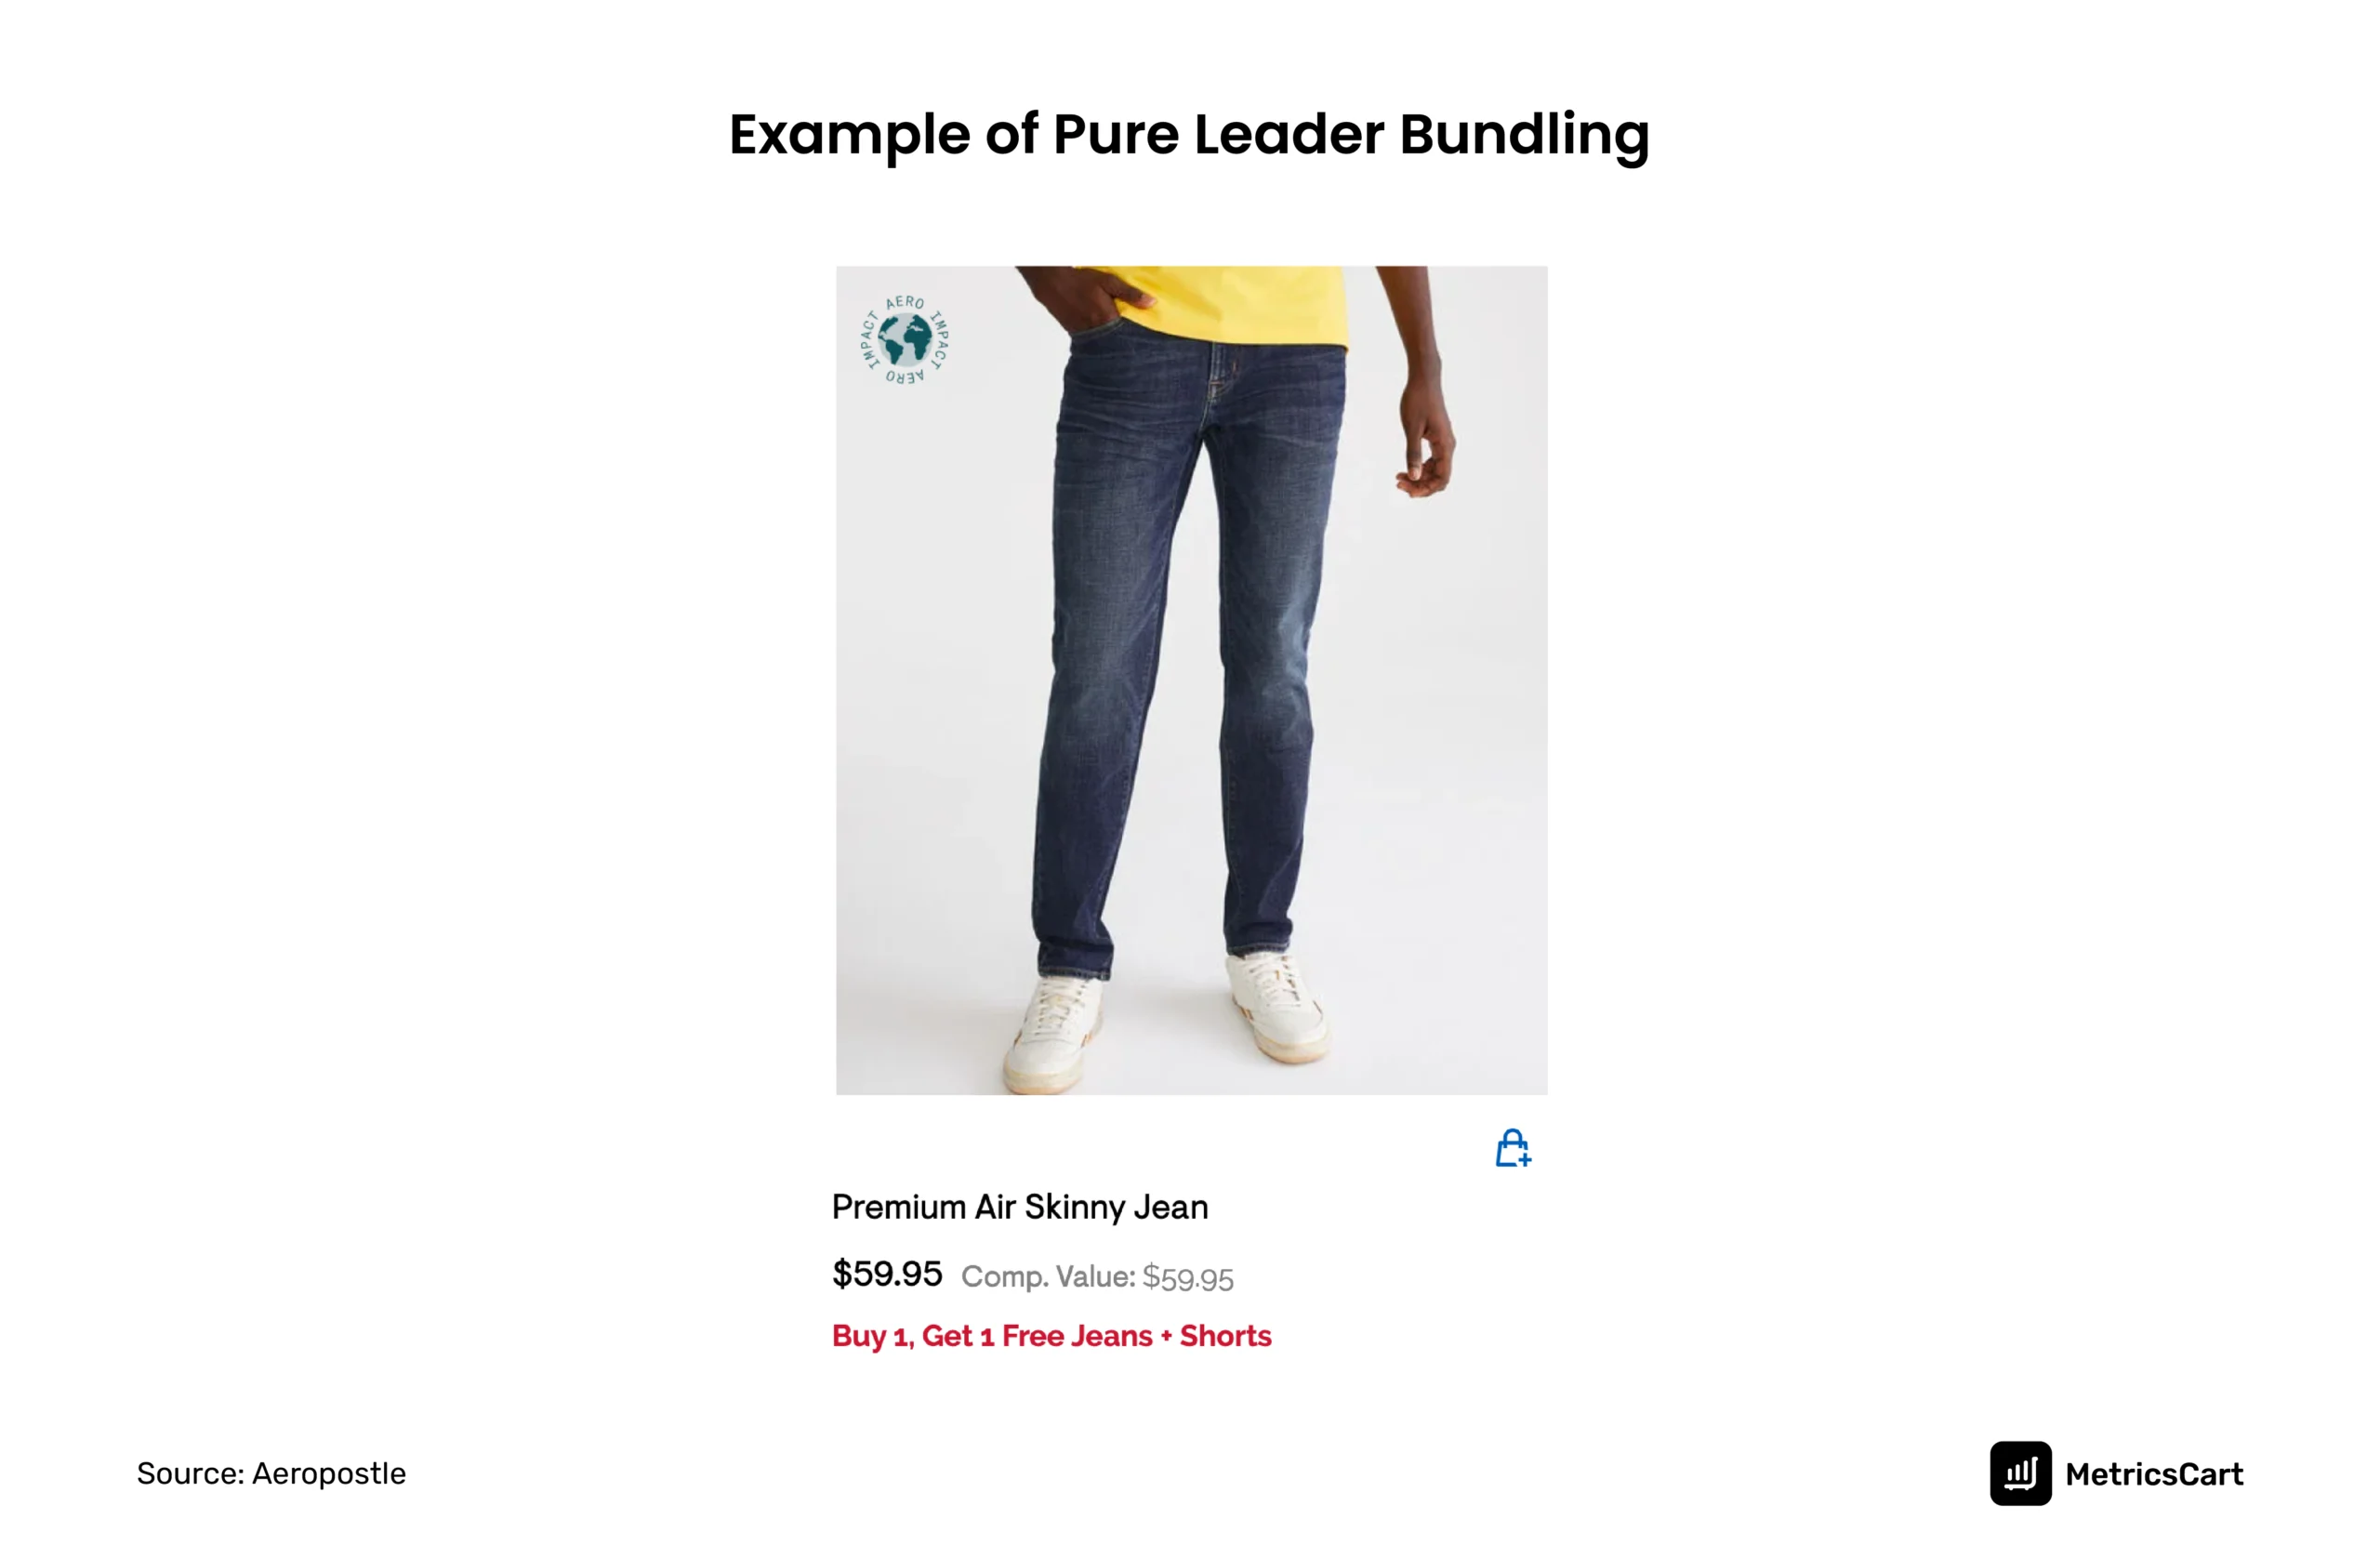 the image shows an example of pure leader bundling, where a complimentary product is offered free with a leader product